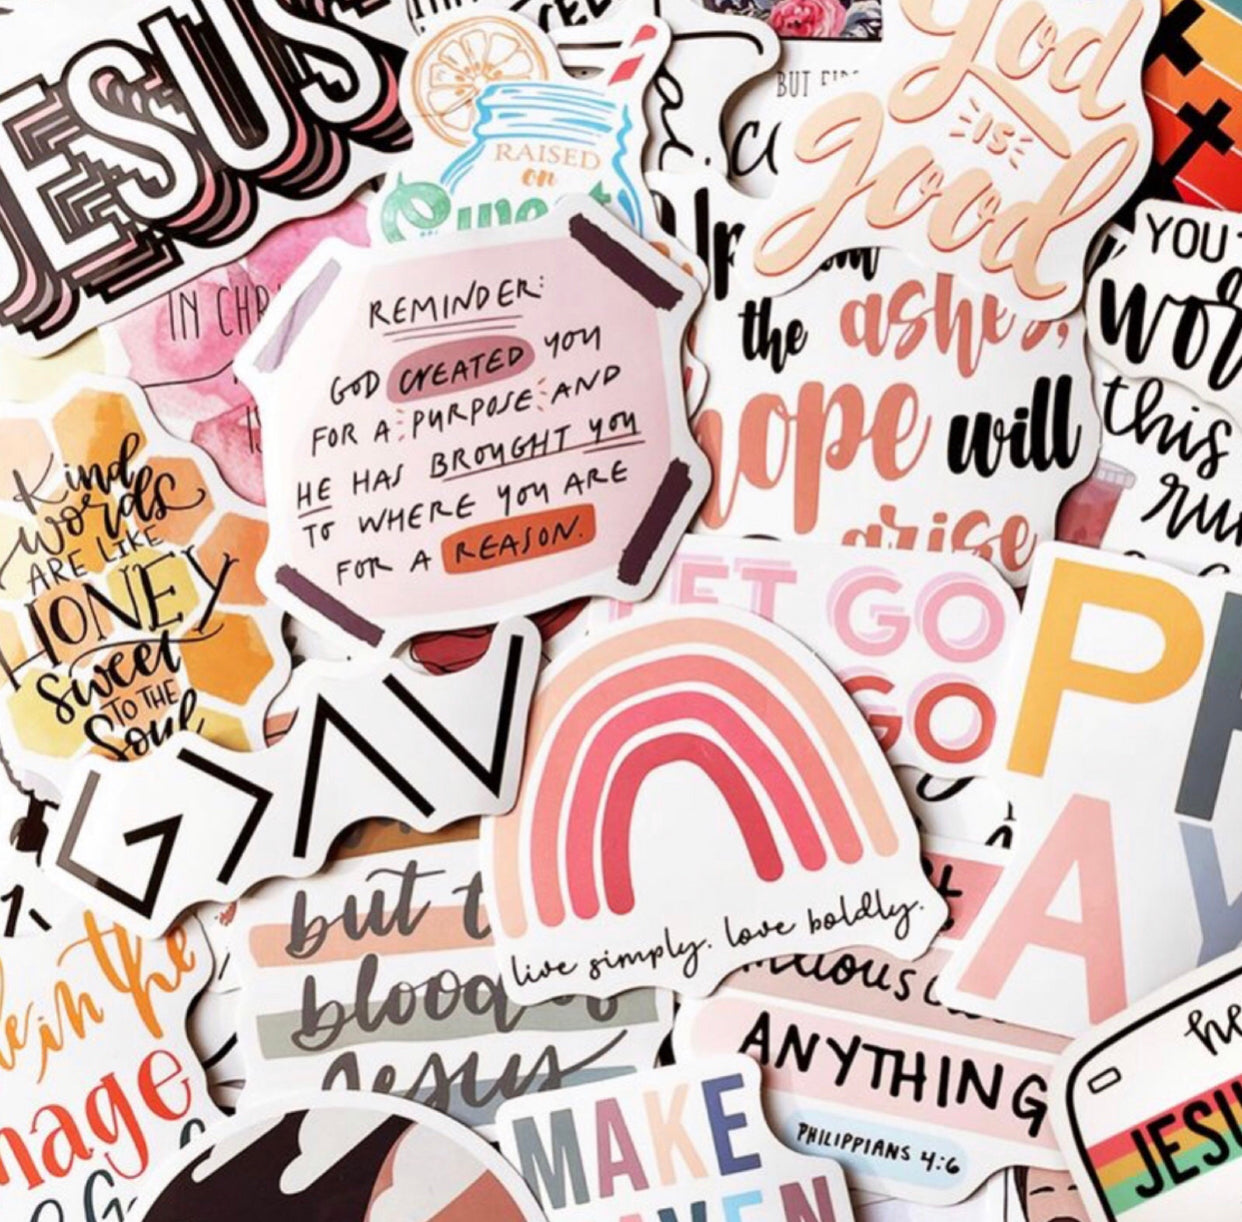 Christian Sticker Bundle, Printable Stickers, Bible Journaling, Religious  Stickers, Aesthetic Sticker, Planner Sticker, Laptop Stickers Pack 